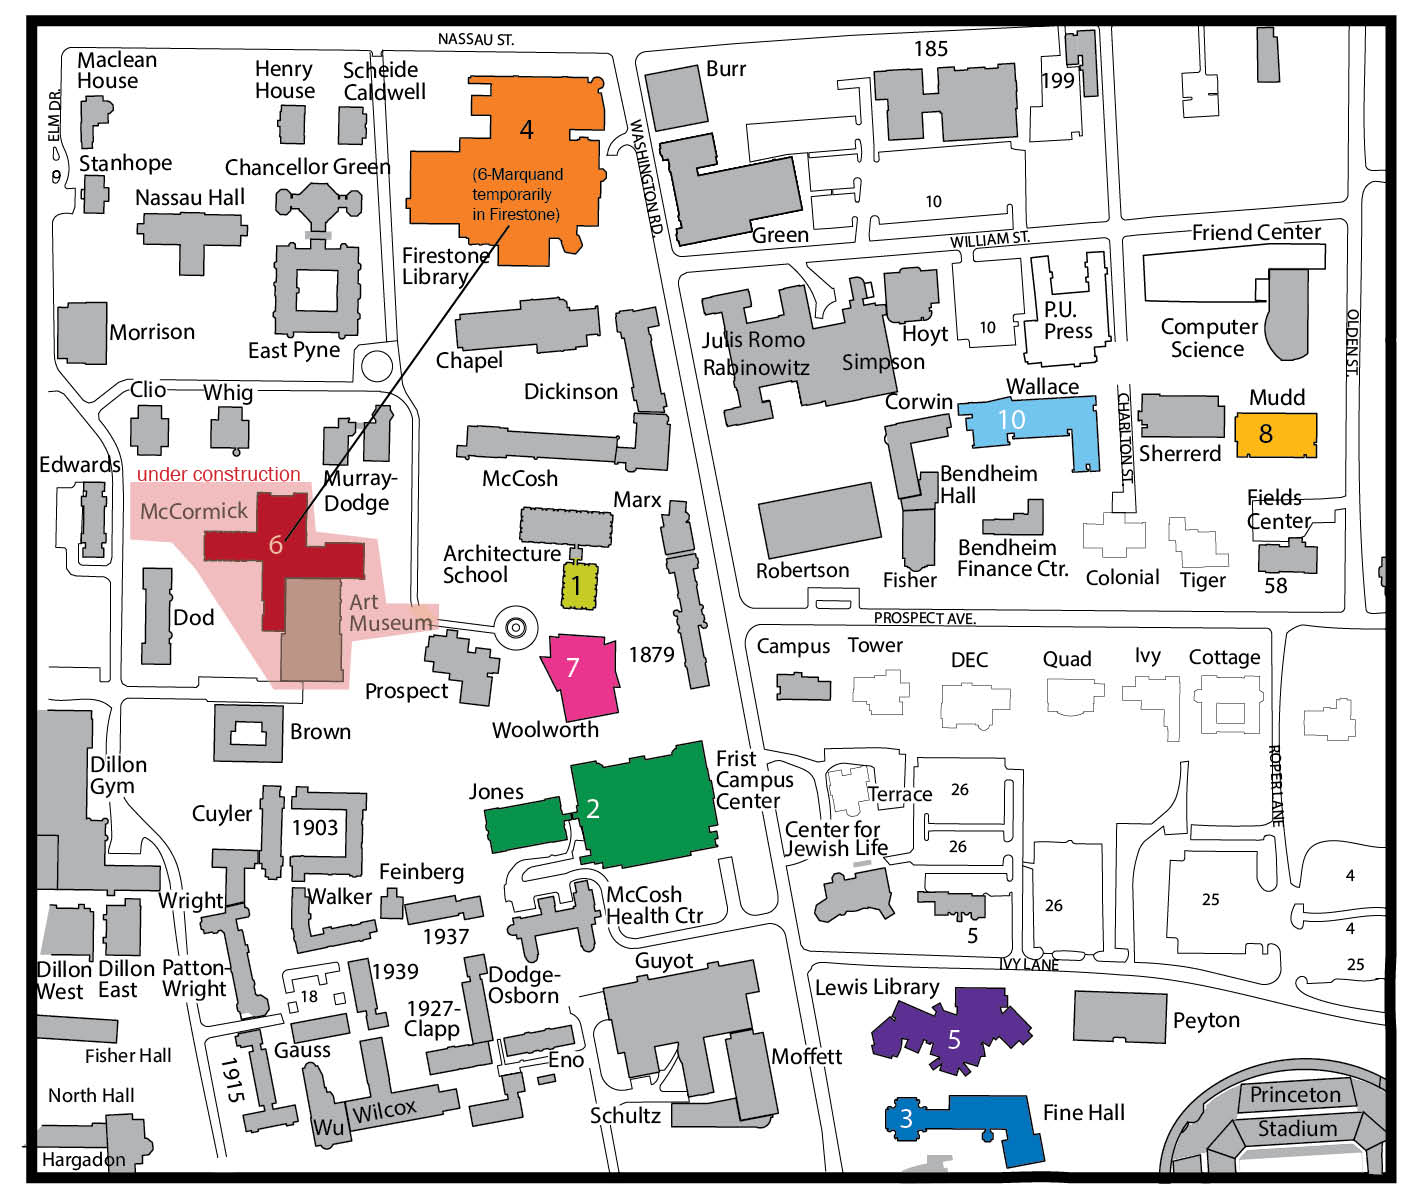 campus library map 2021